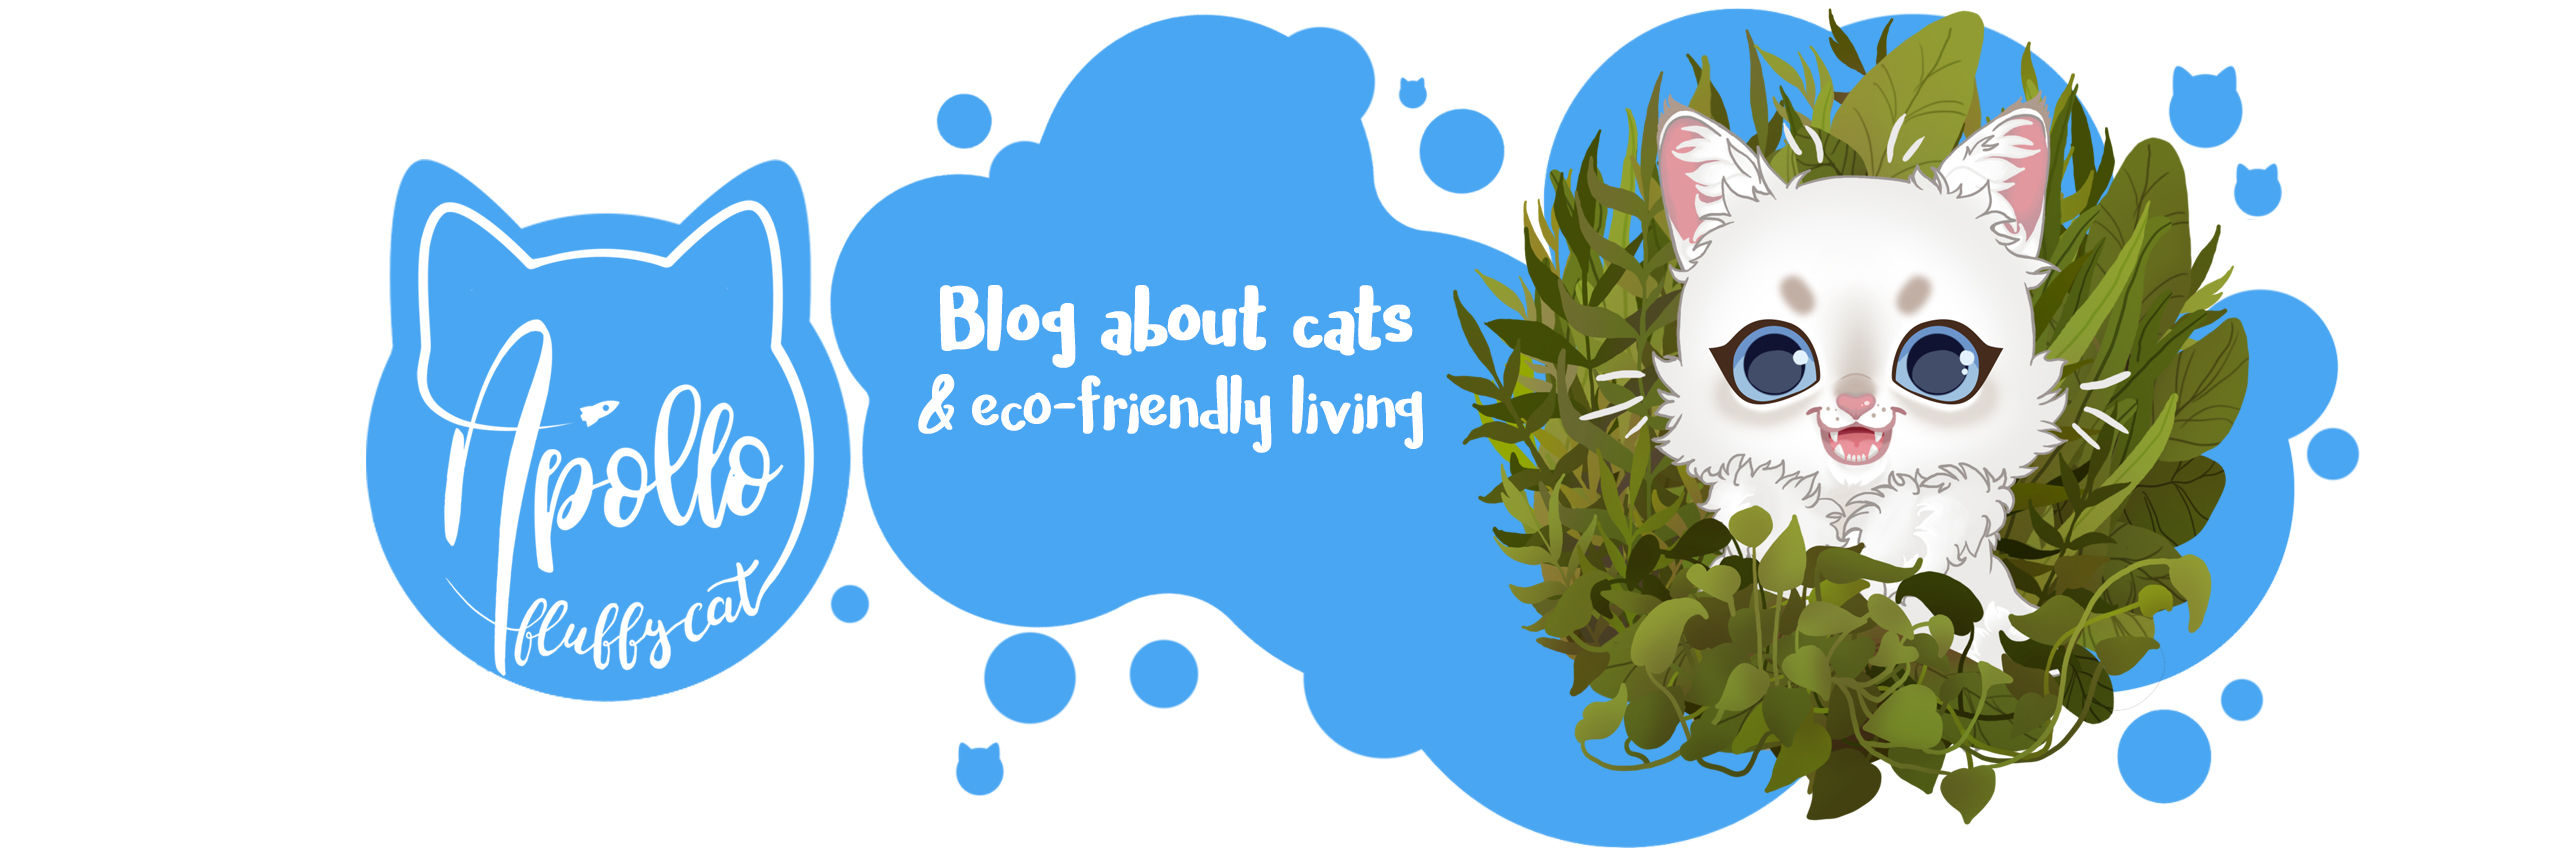 Apollo Fluffy Cat | Blog about cats and eco-friendly living